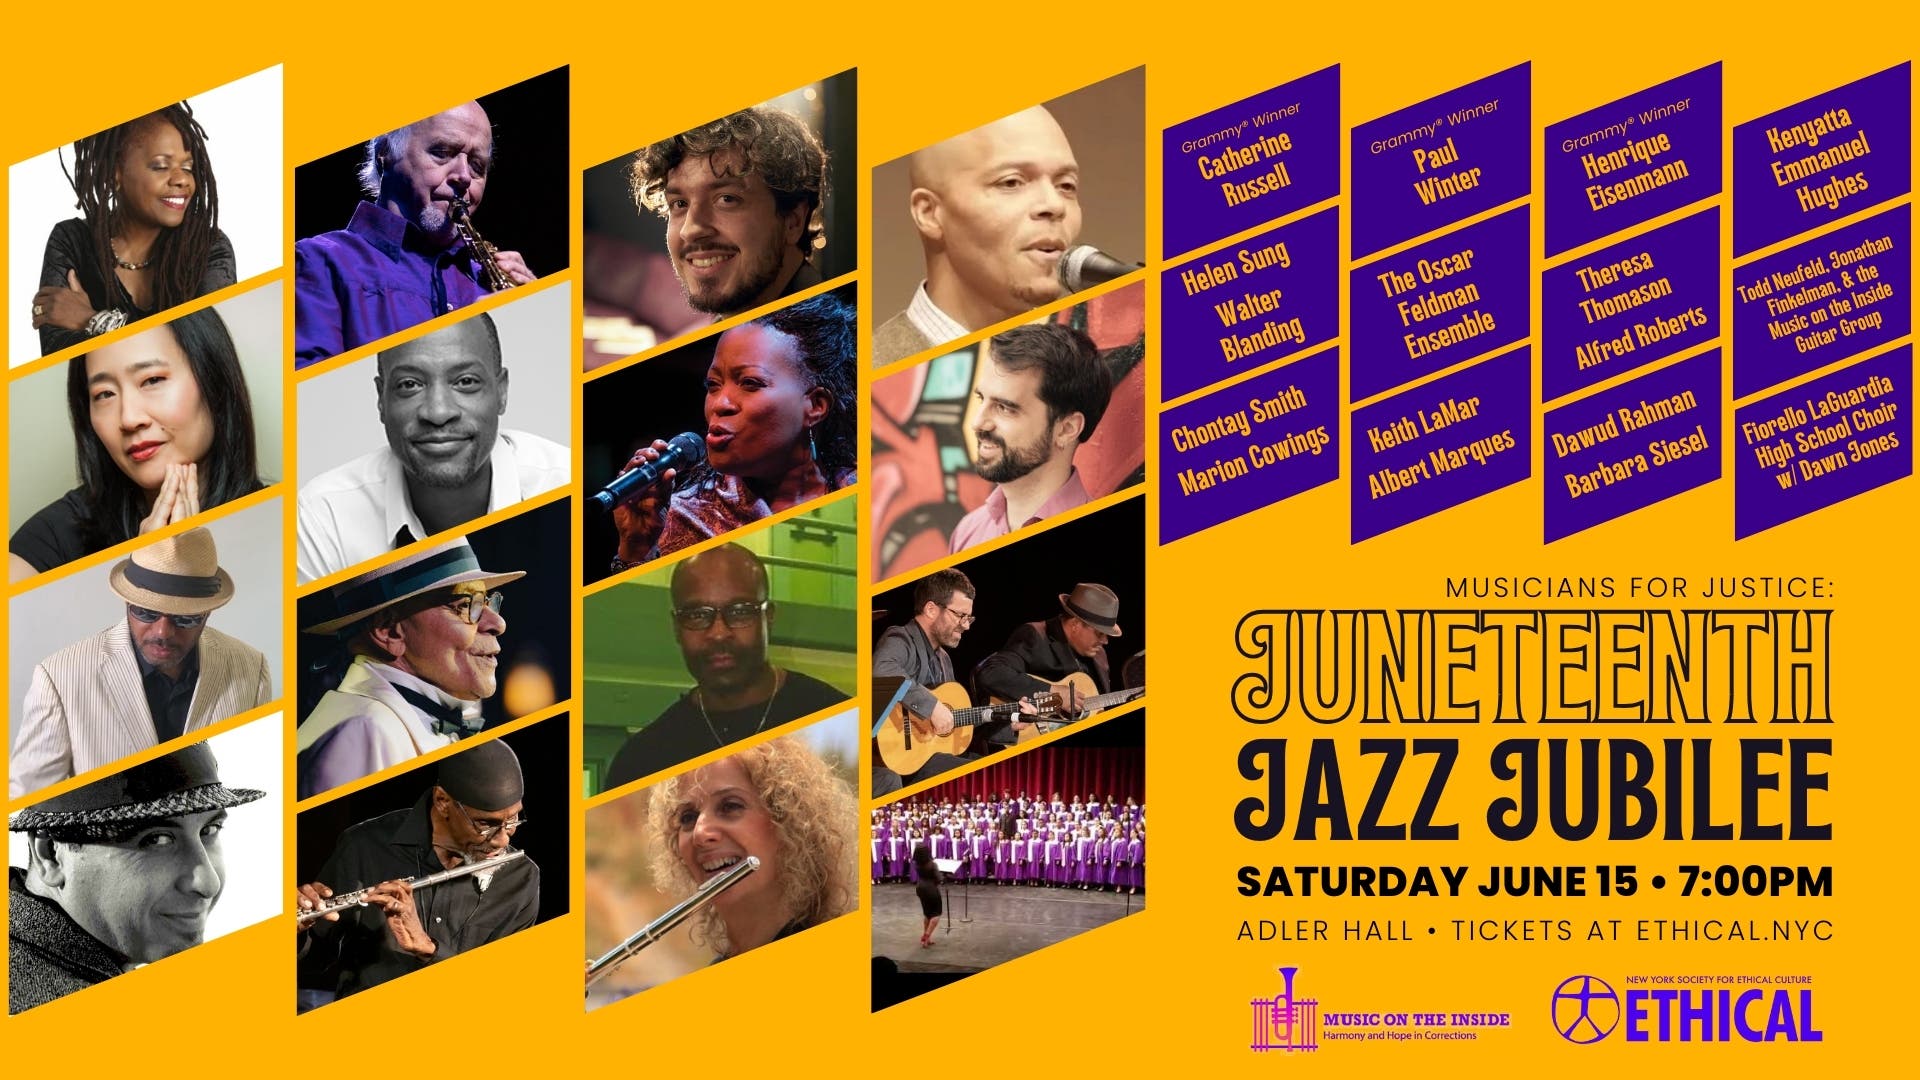 Juneteenth Jazz Jubilee Benefit Concert for Music on The Inside